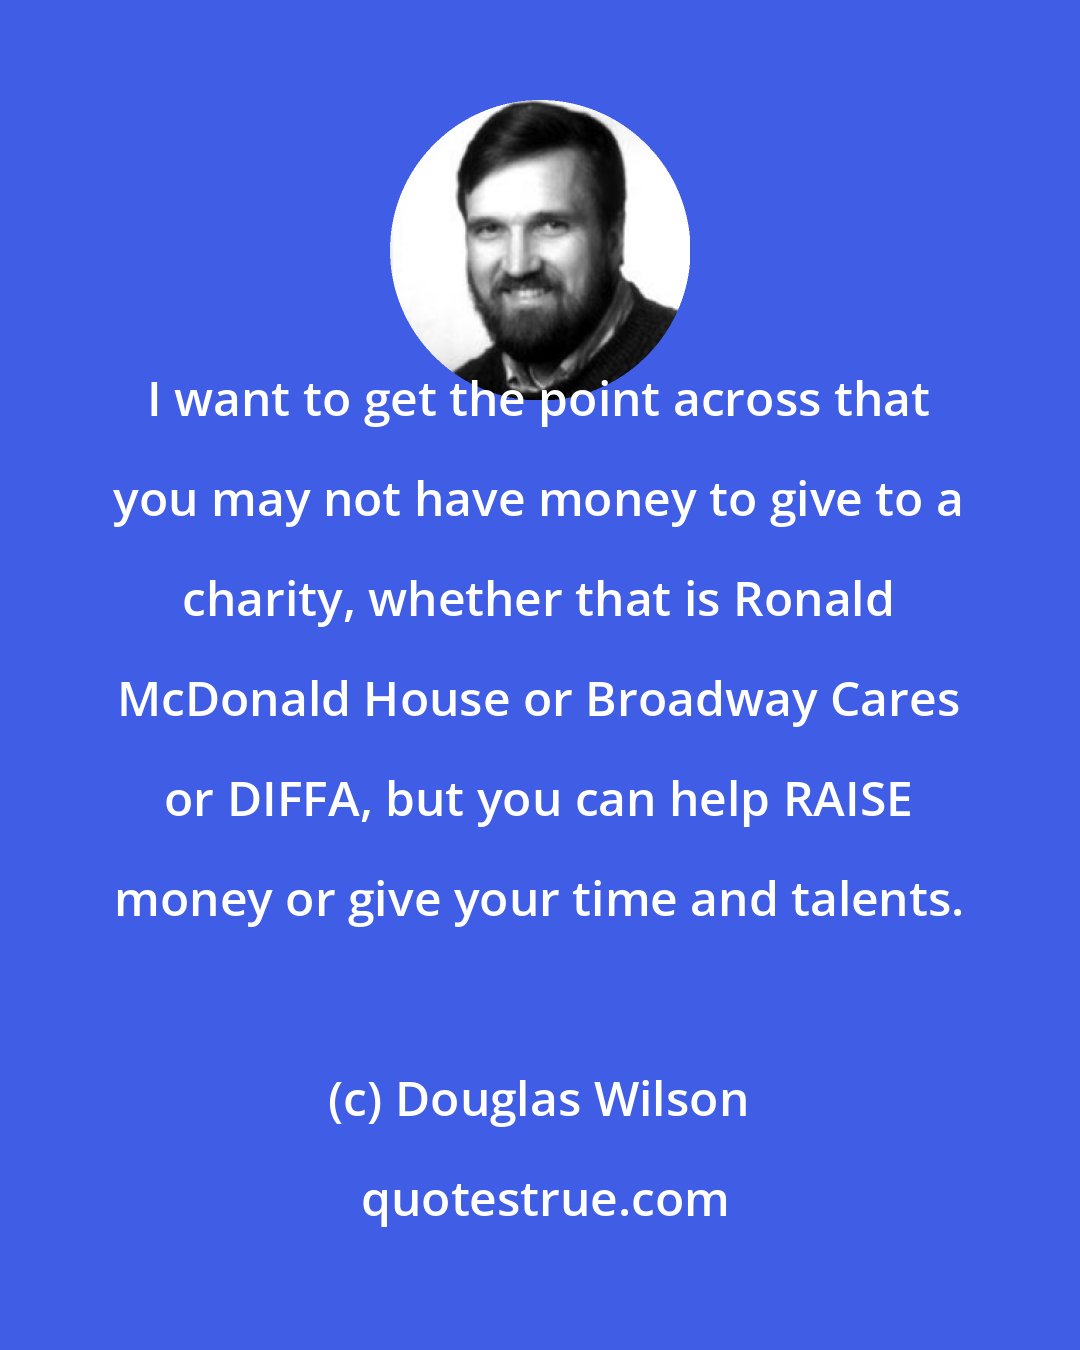 Douglas Wilson: I want to get the point across that you may not have money to give to a charity, whether that is Ronald McDonald House or Broadway Cares or DIFFA, but you can help RAISE money or give your time and talents.